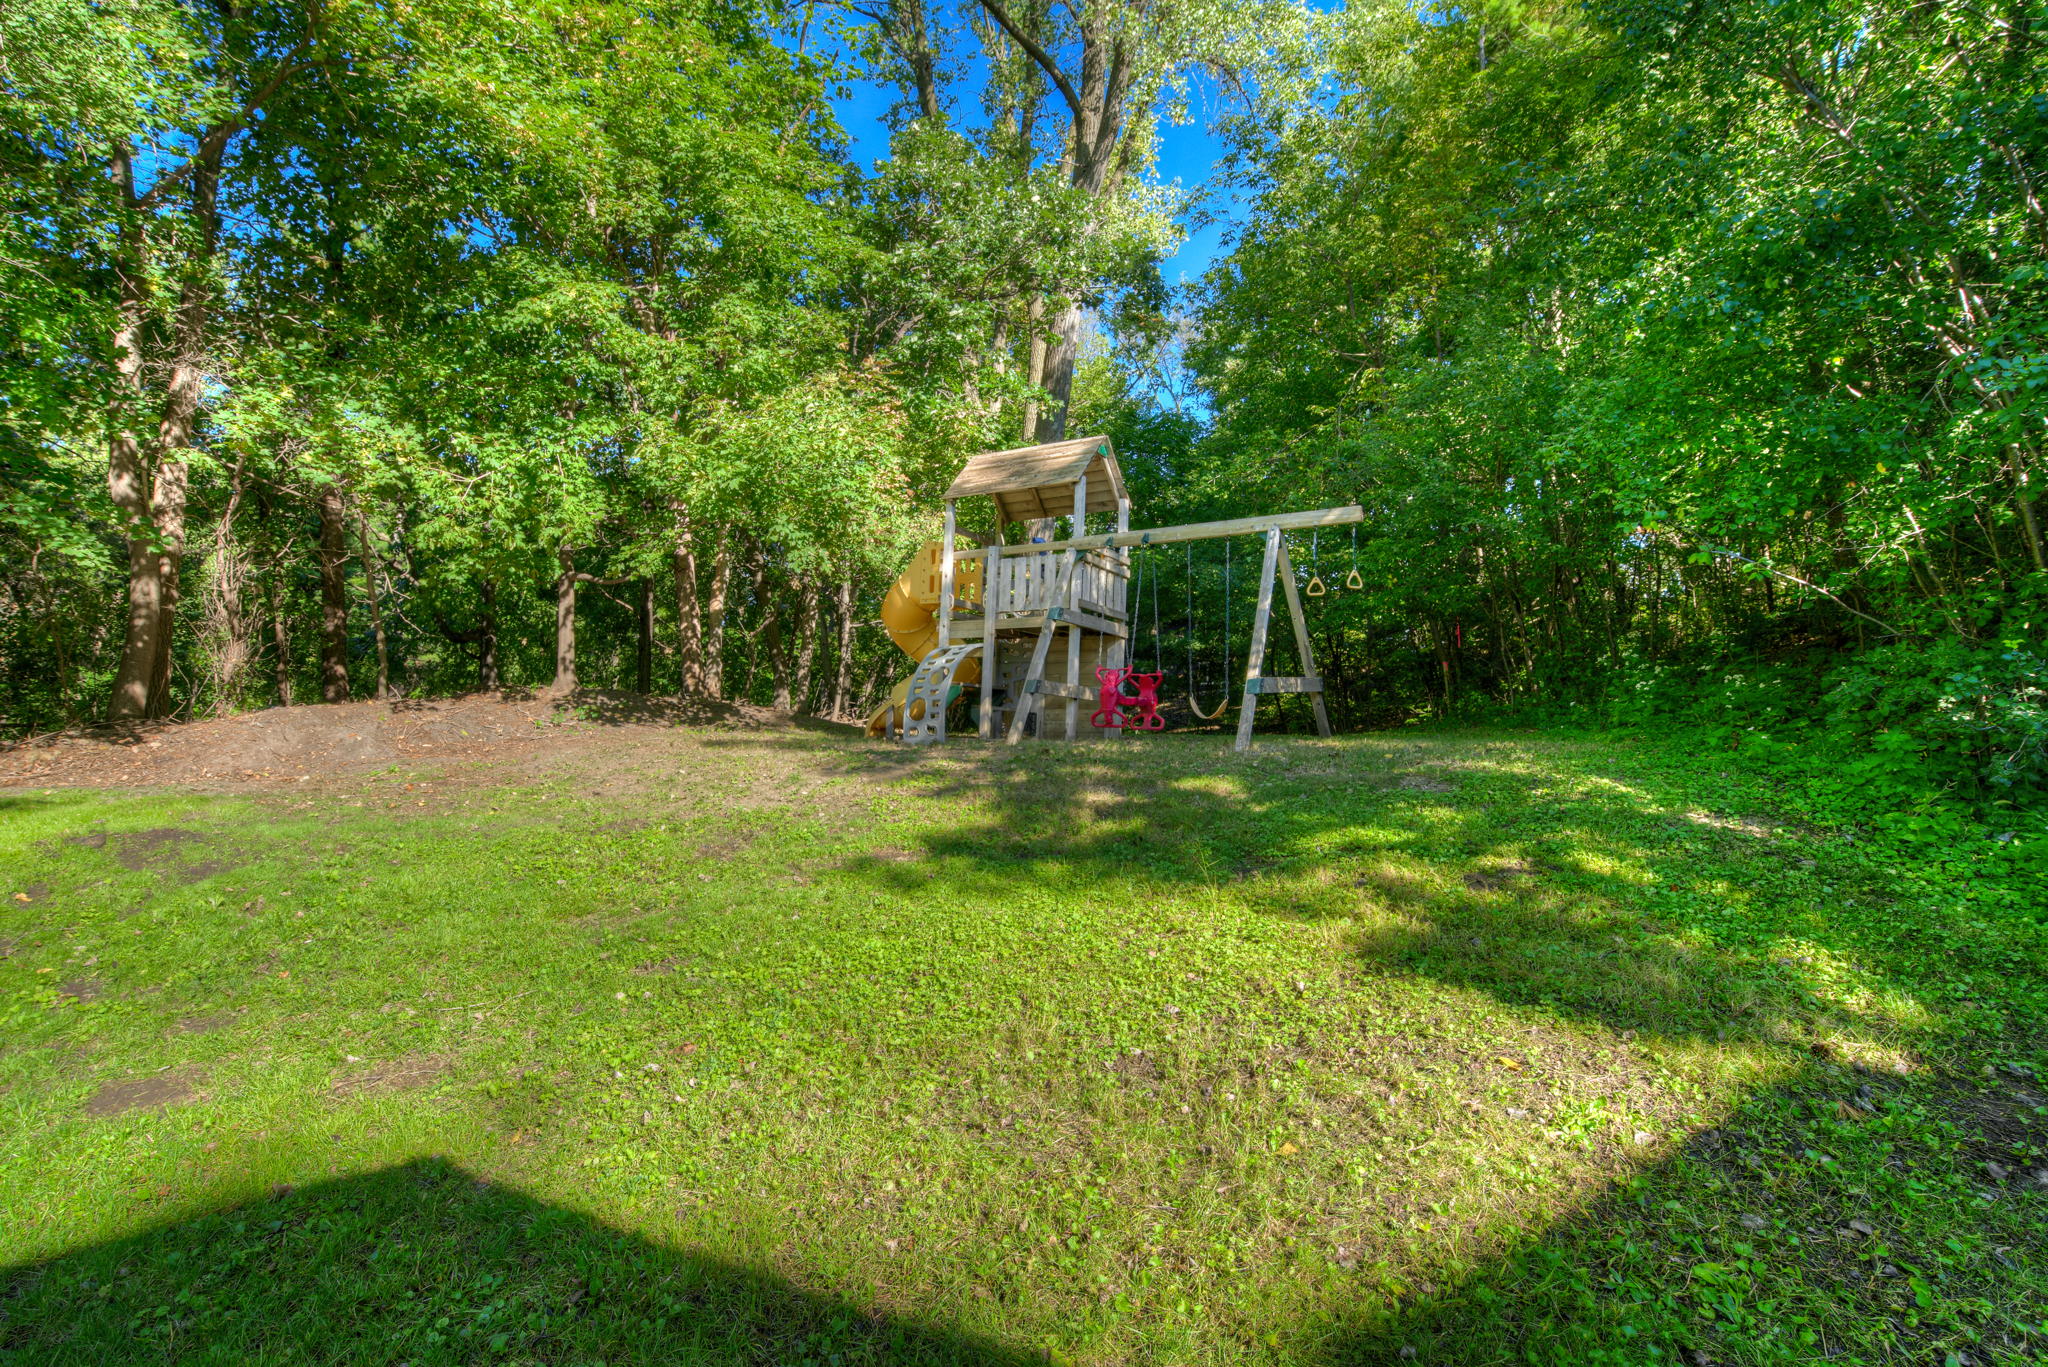 Play area in back yard